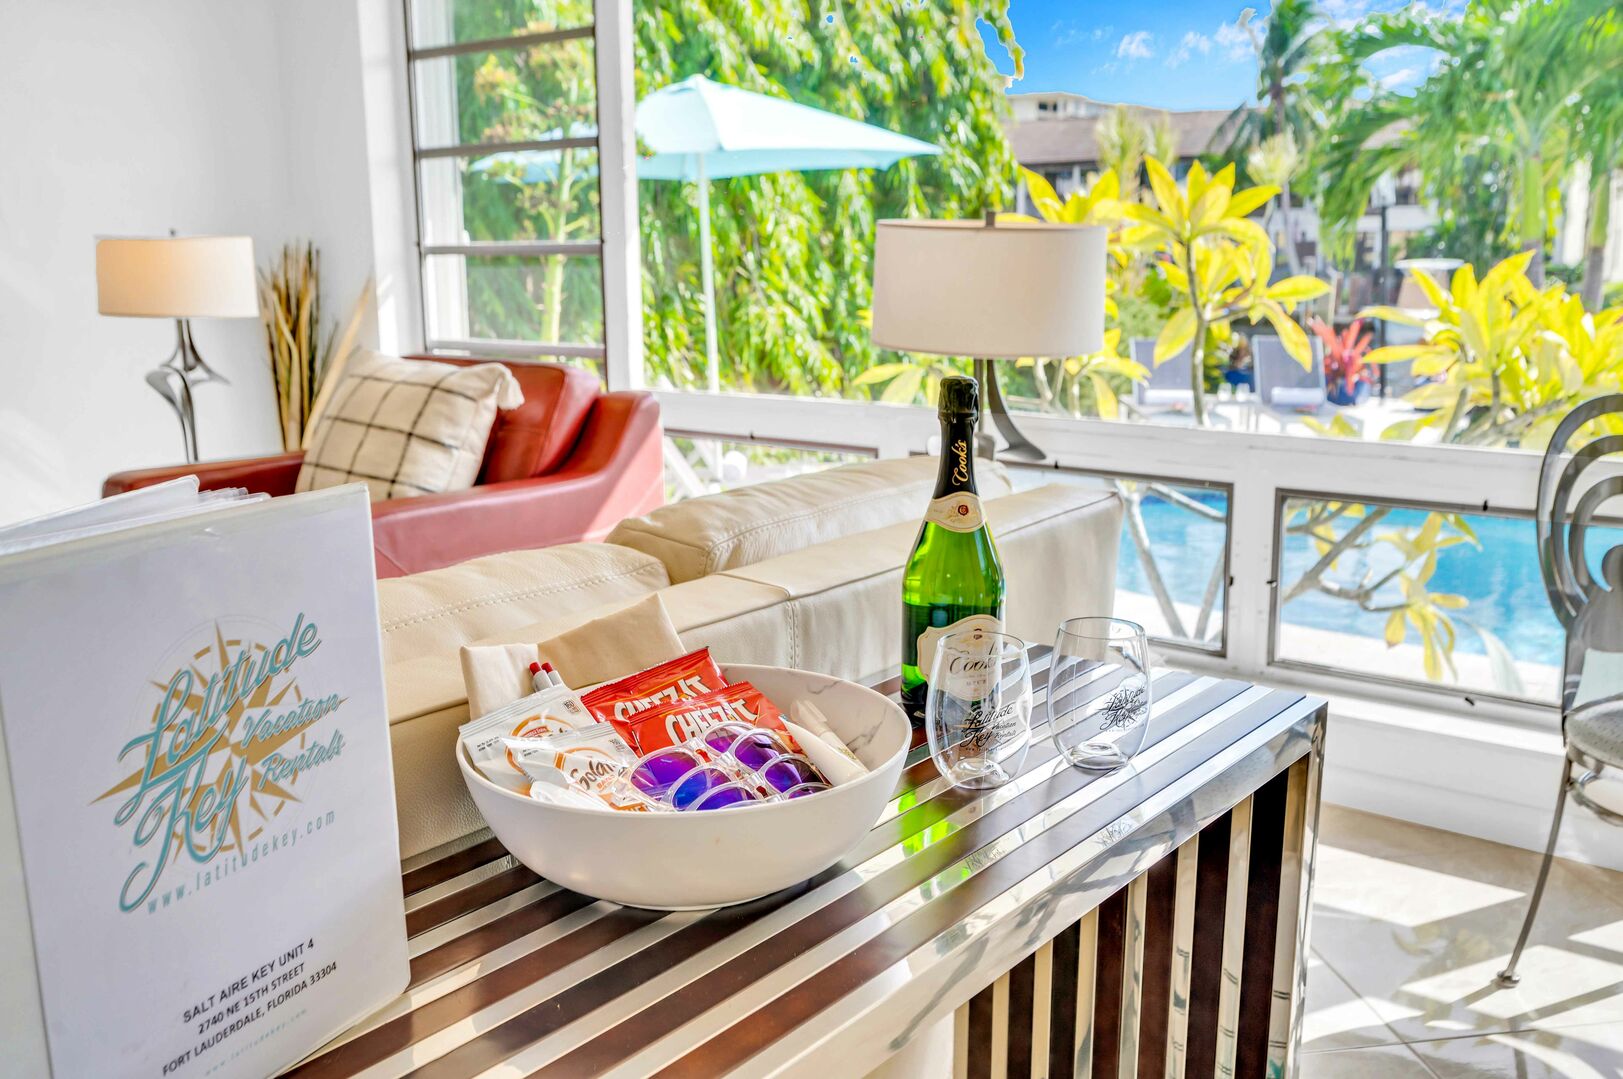 When you stay at SaltAire 4, you'll be greeted by a welcome gift too, courtesy of Latitude Key Vacations!